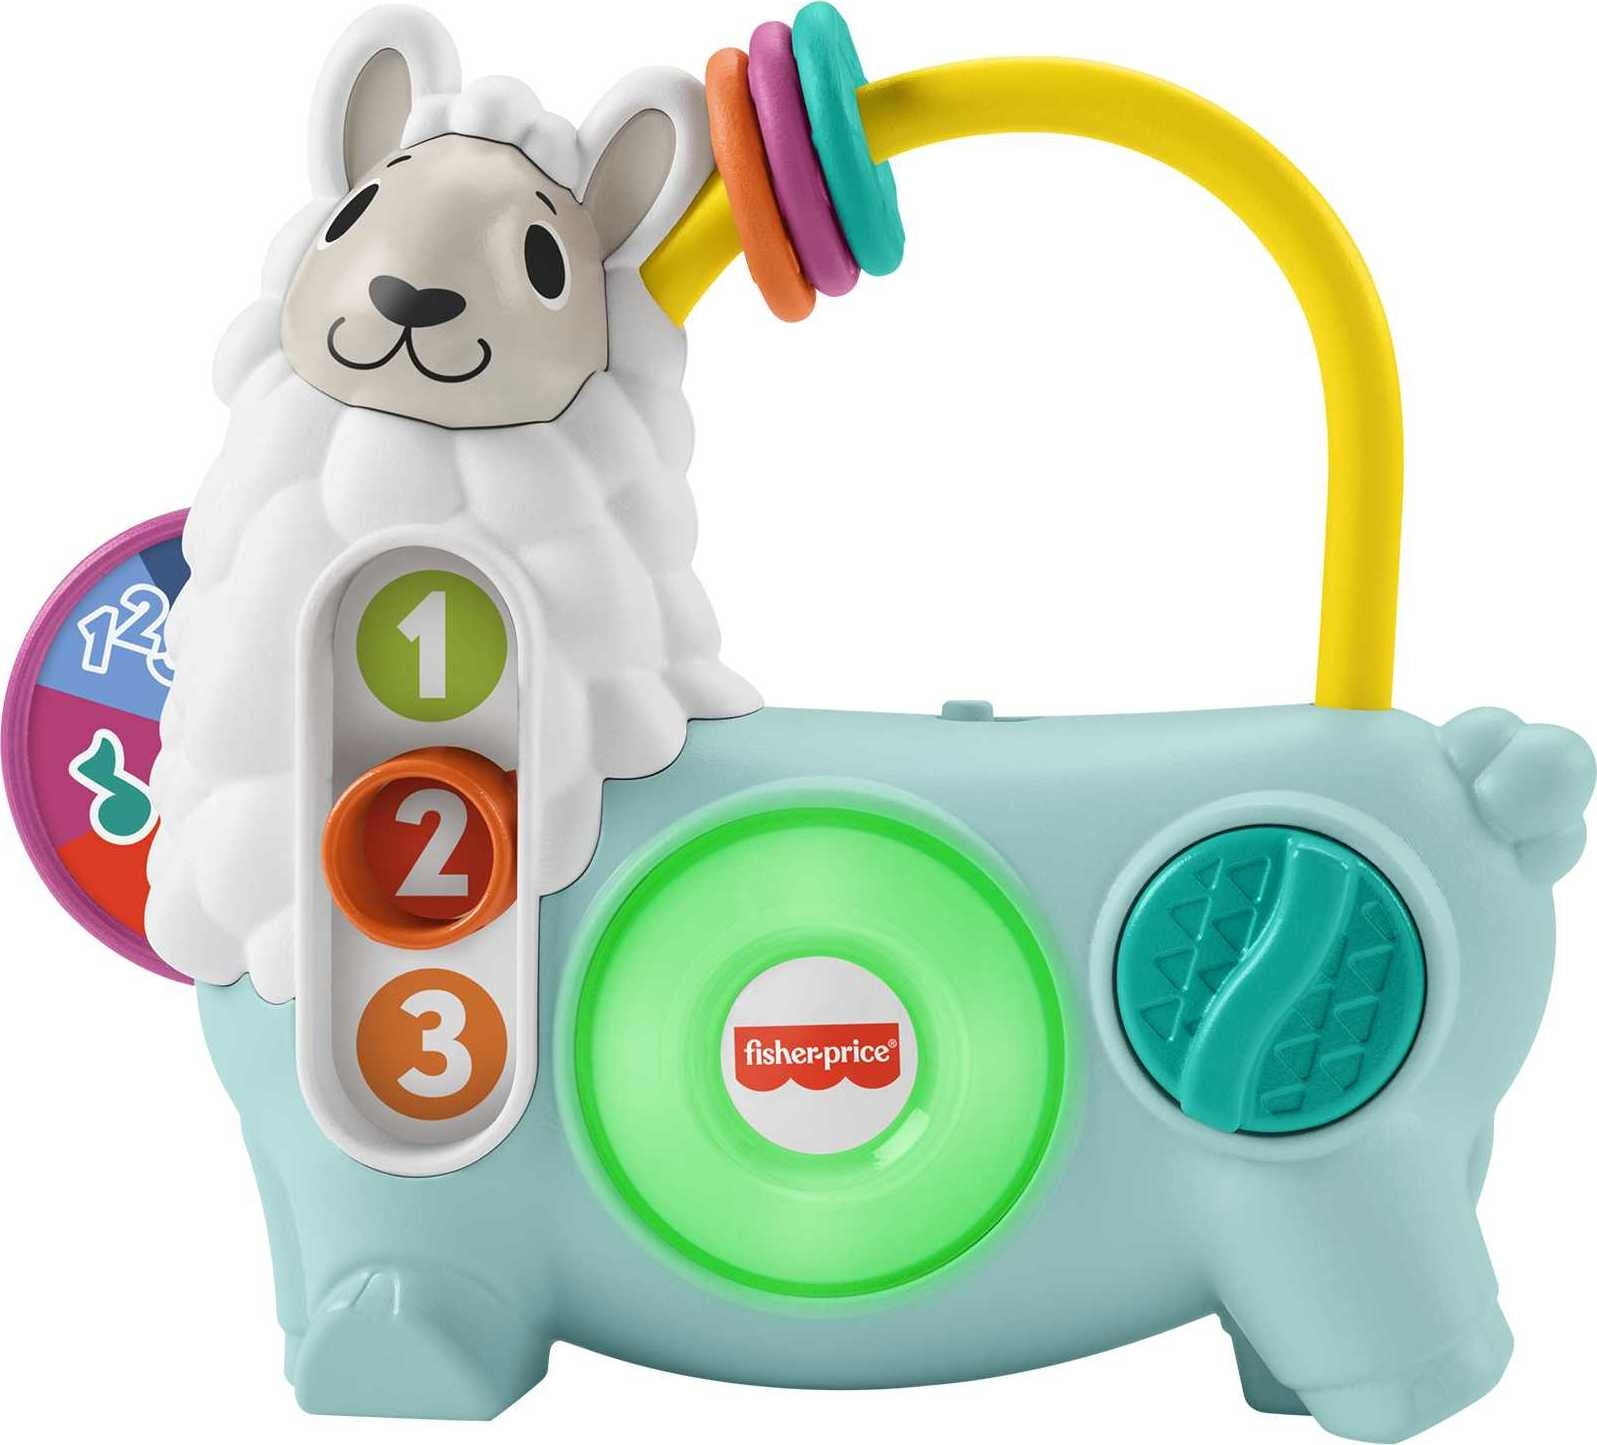 Fisher-Price Linkimals Baby Learning Toy with Lights and Music, 123 Activity Llama